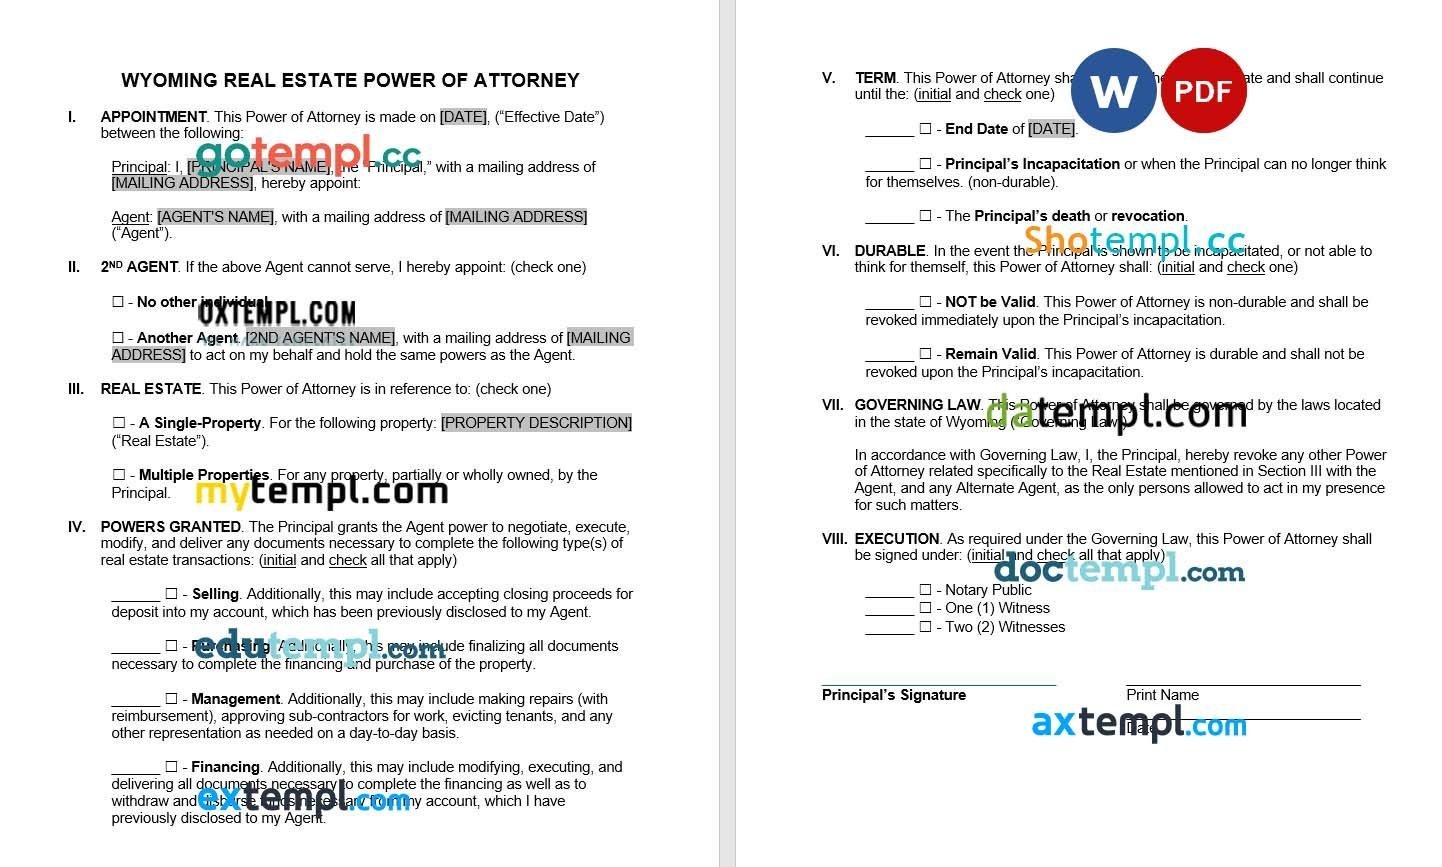 Wyoming Real Estate Power of Attorney example, fully editable